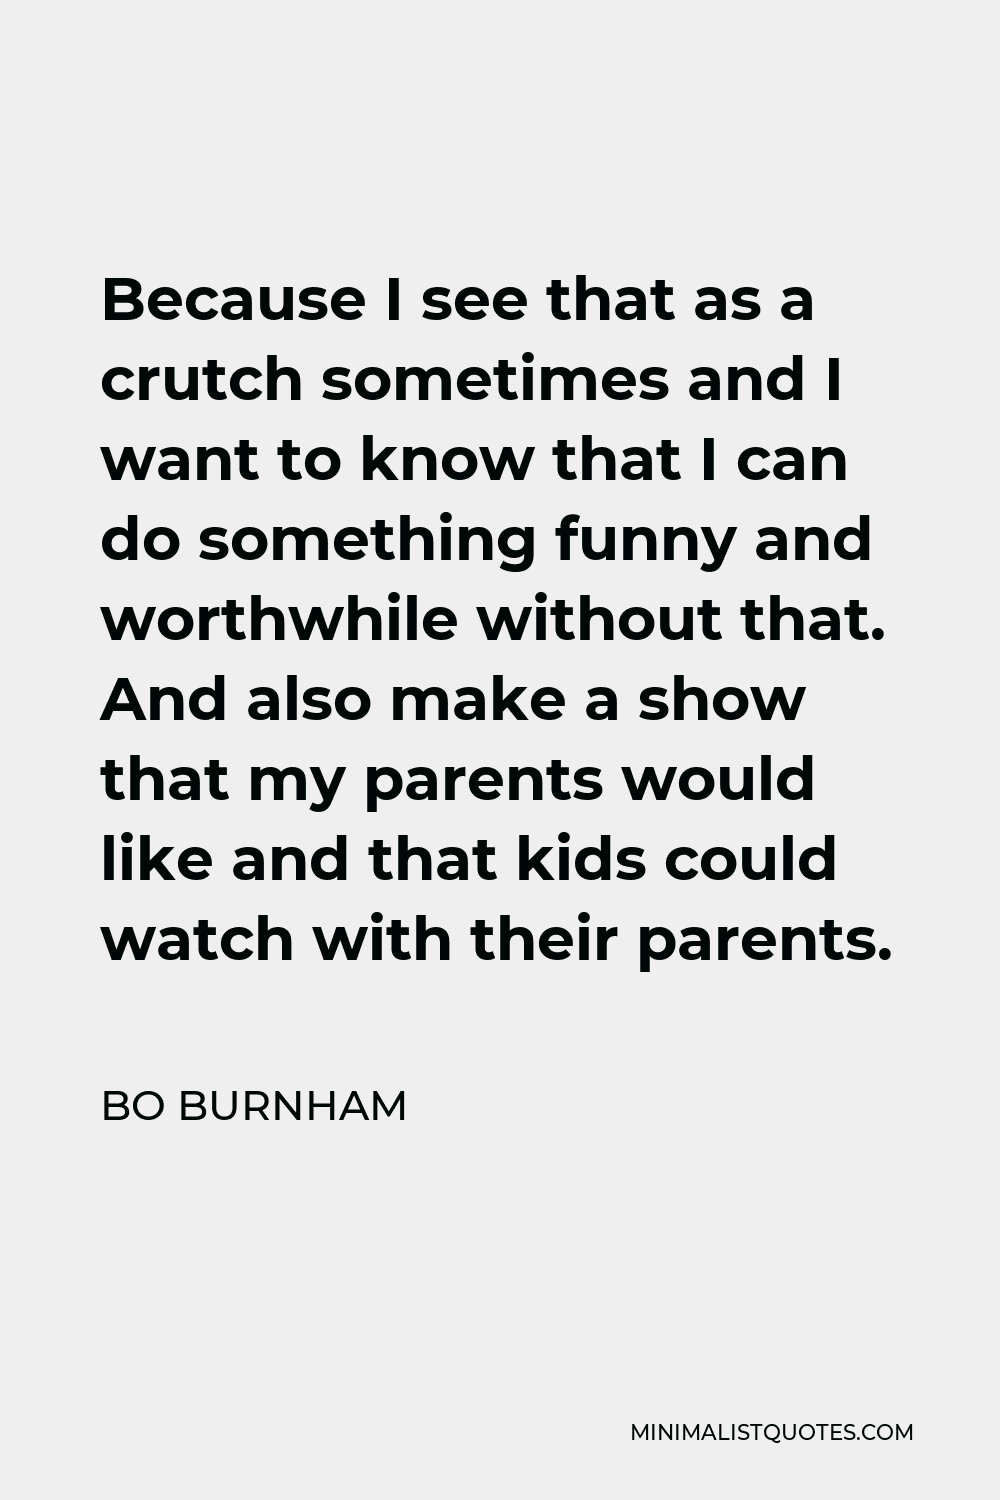 Bo Burnham Quote: Because I see that as a crutch sometimes and I want to  know that I can do something funny and worthwhile without that. And also  make a show that